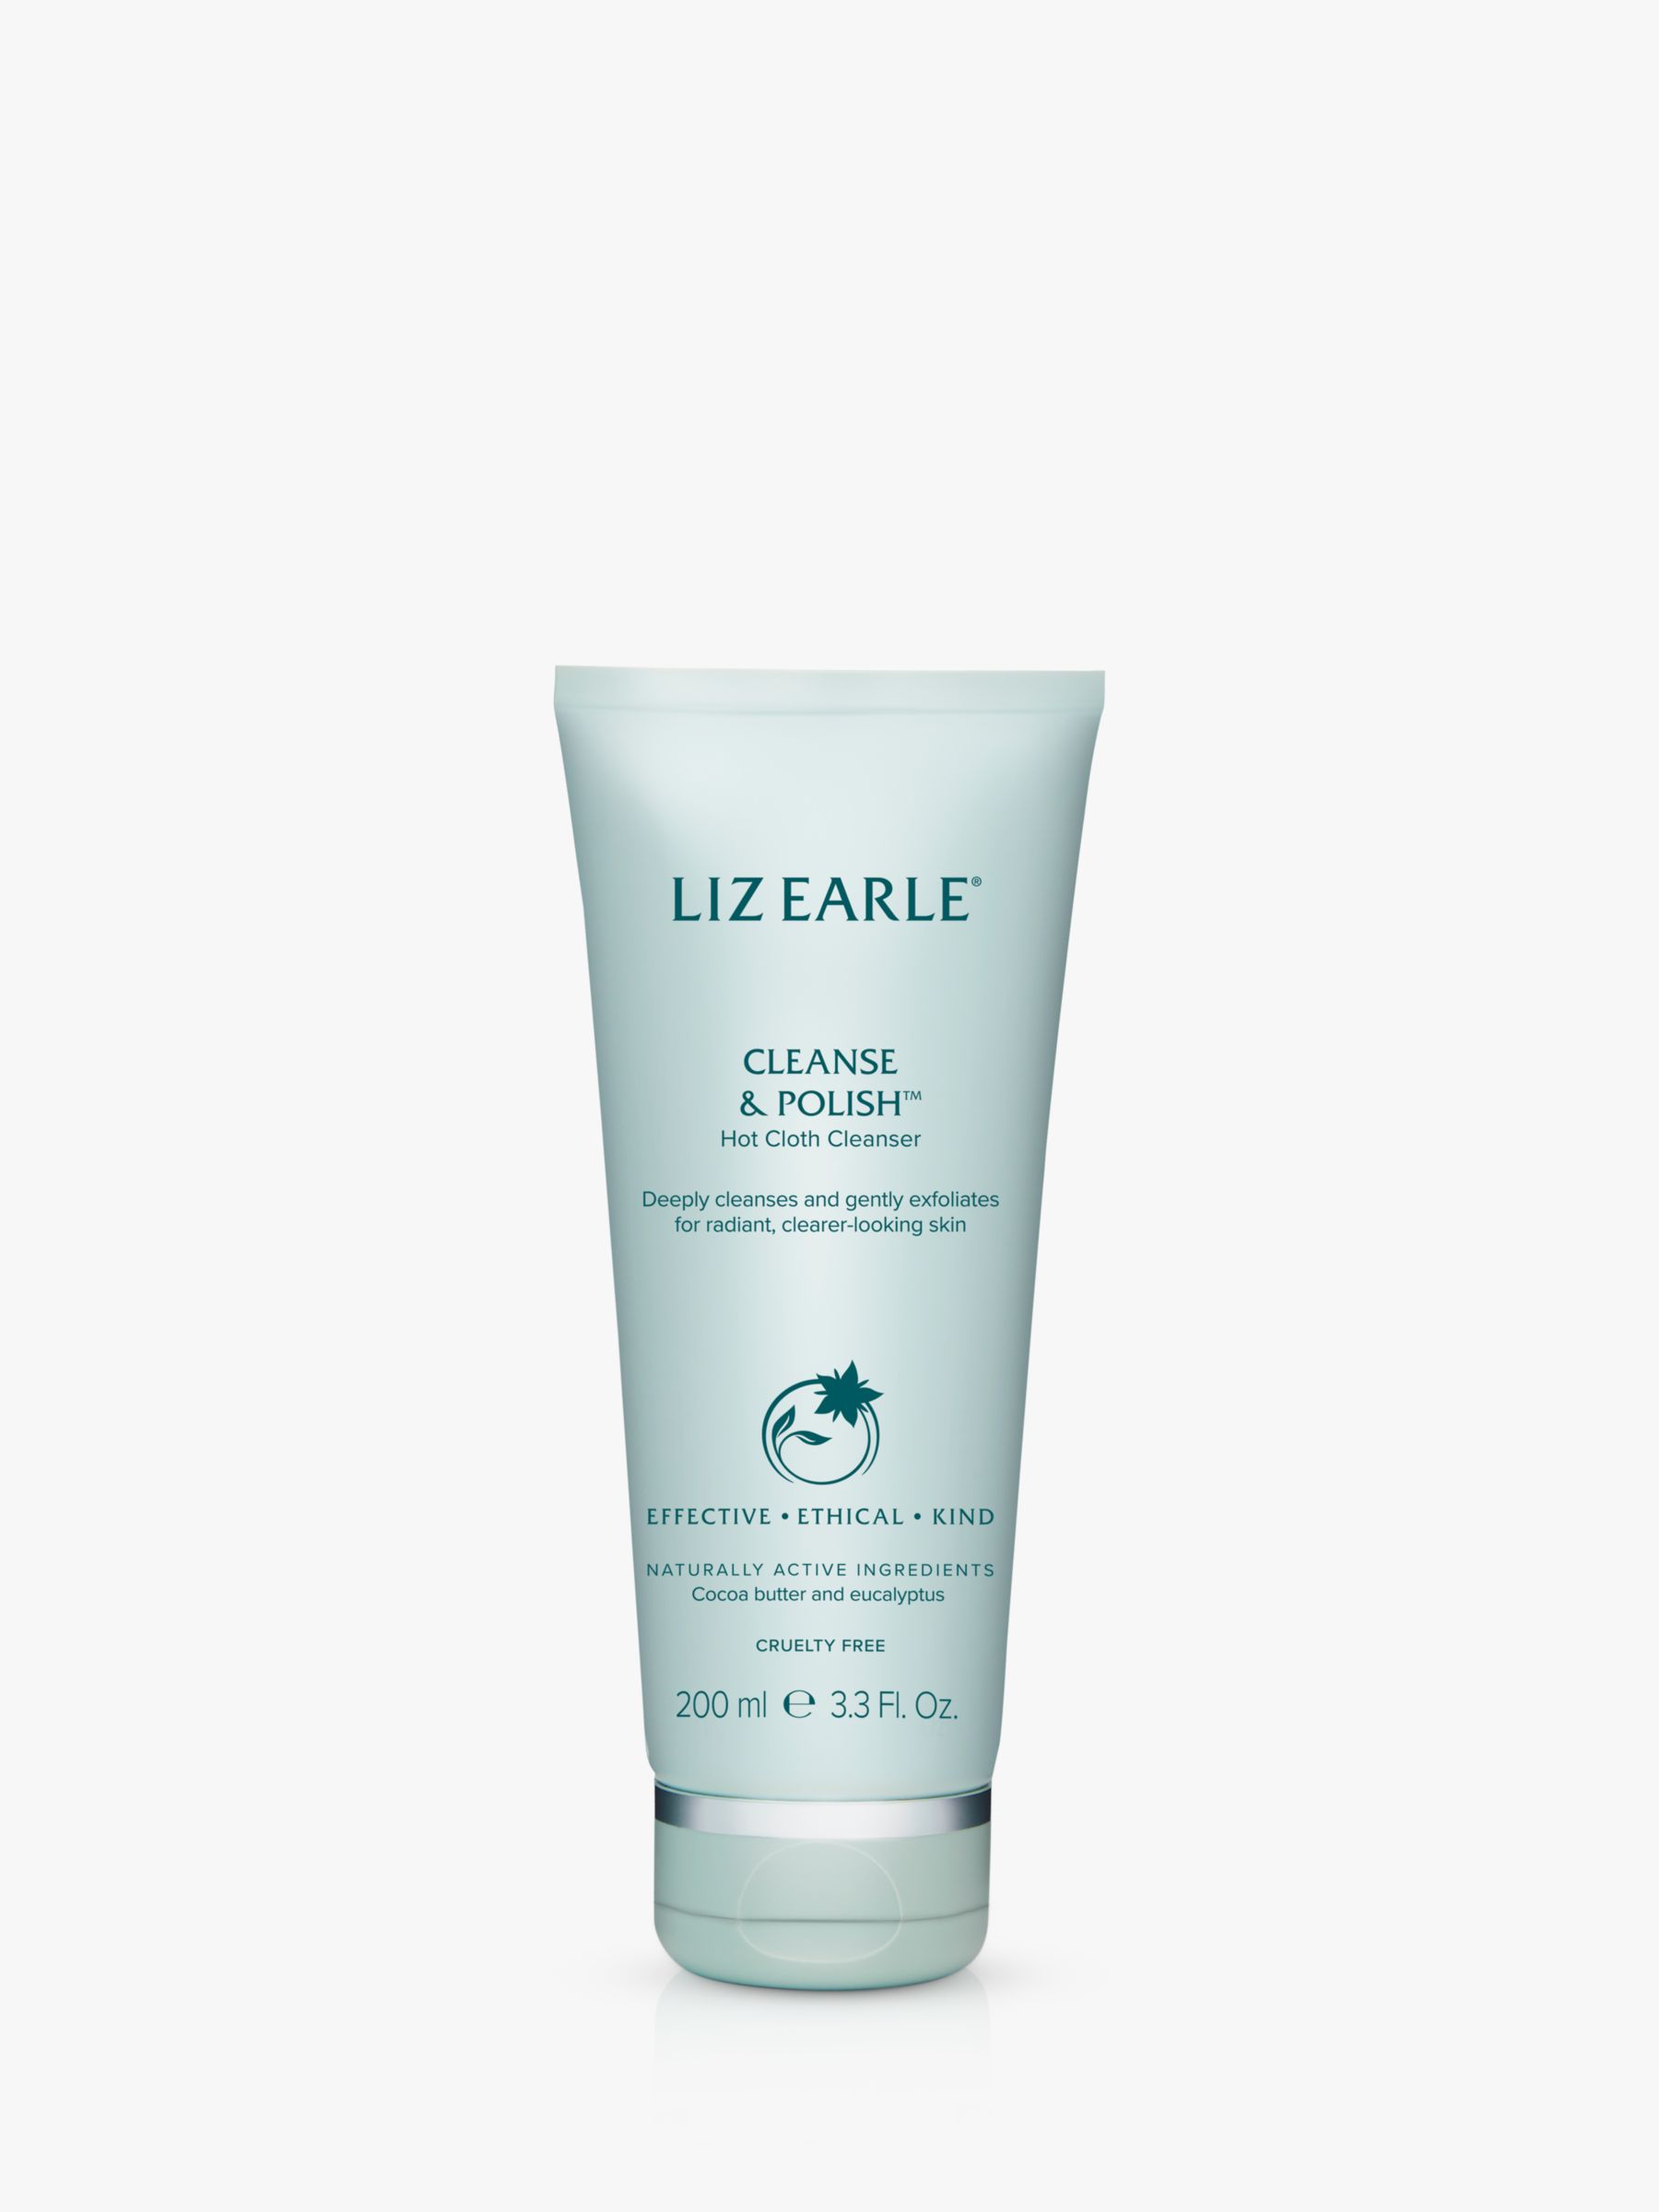 Liz Earle Cleanse And Polish™ Hot Cloth Cleanser 200ml At John Lewis